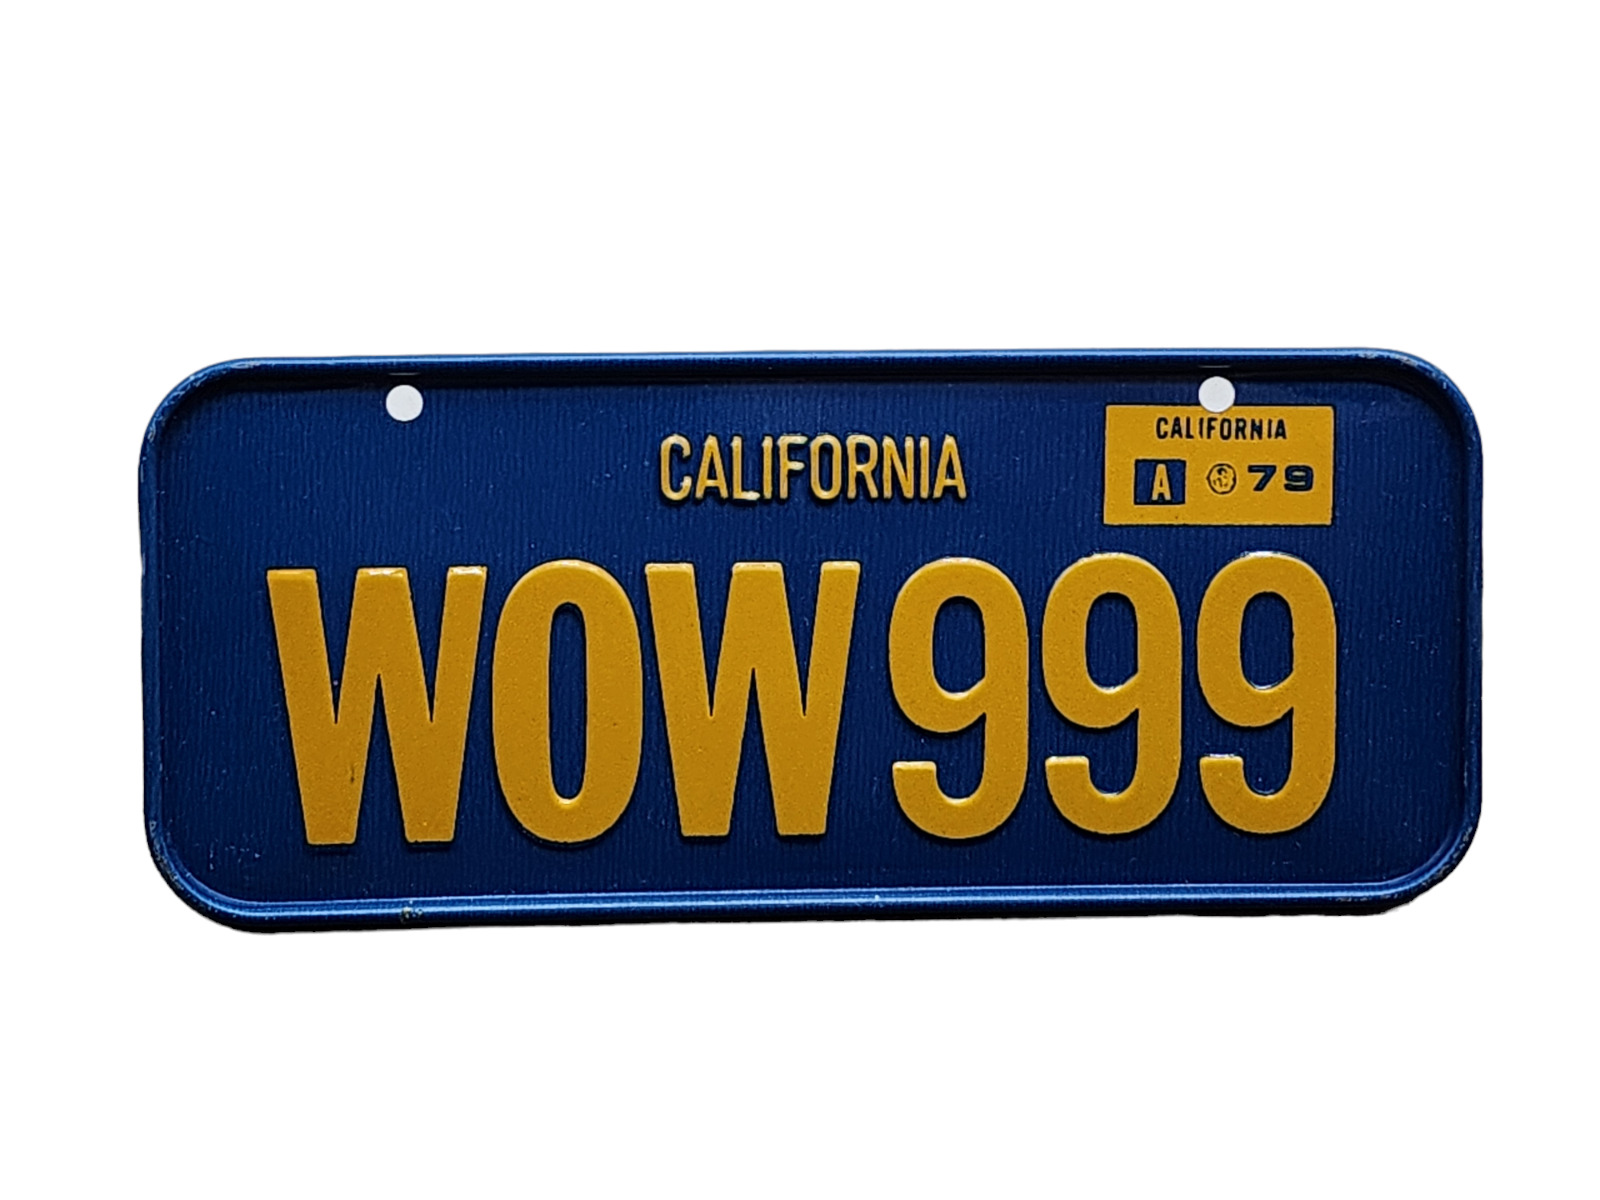 1979 California WOW999 Blue Mini Bicycle Cereal License Plate